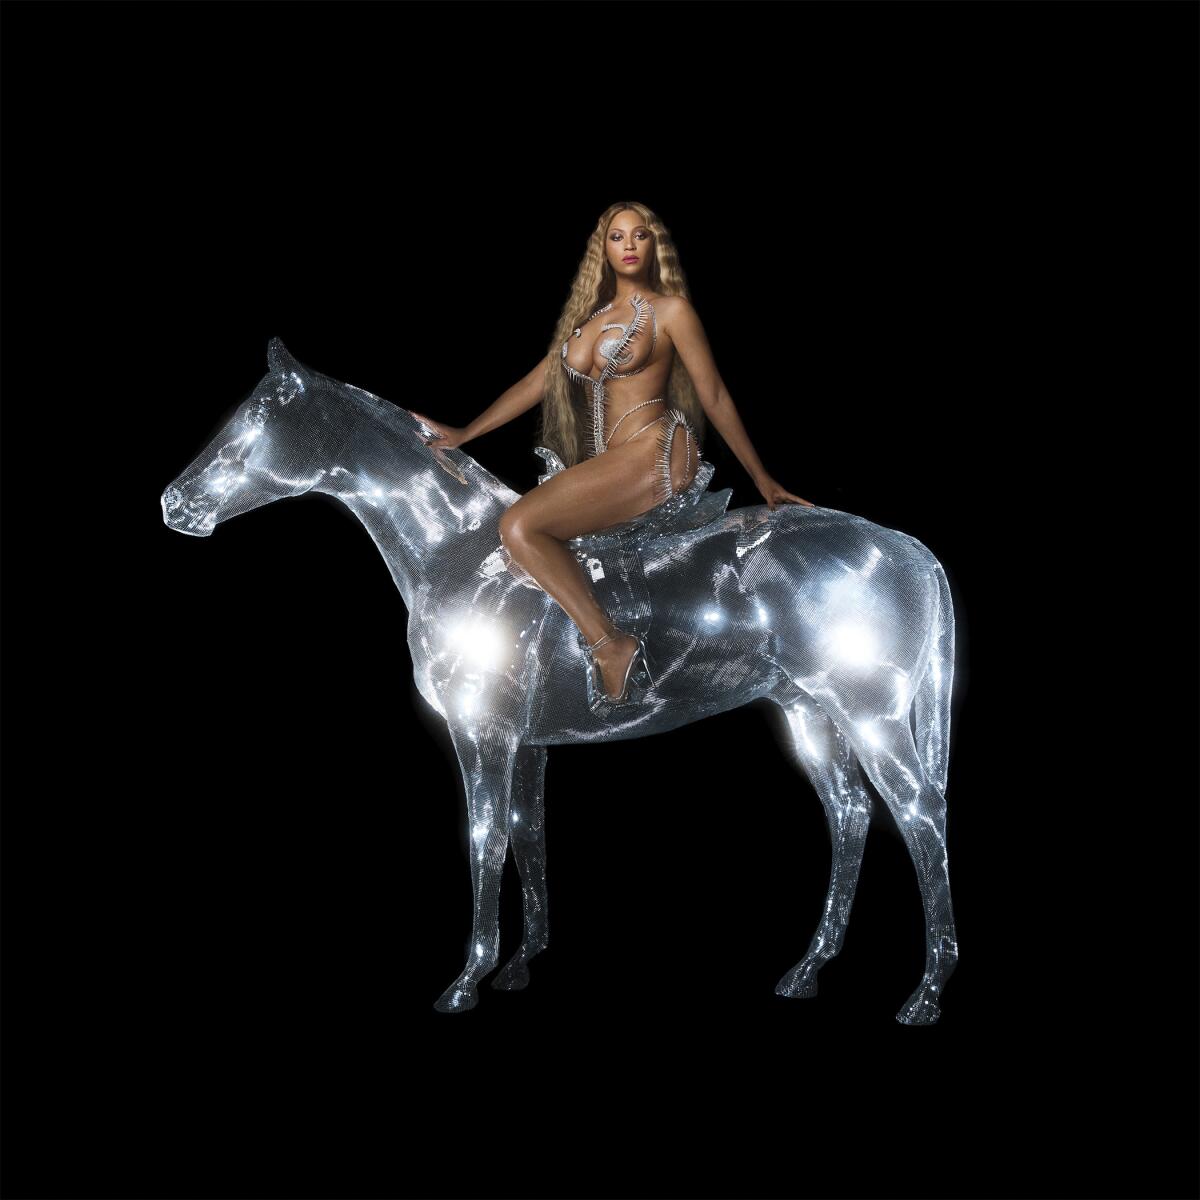 Album cover shows a woman straddling a translucent horse 